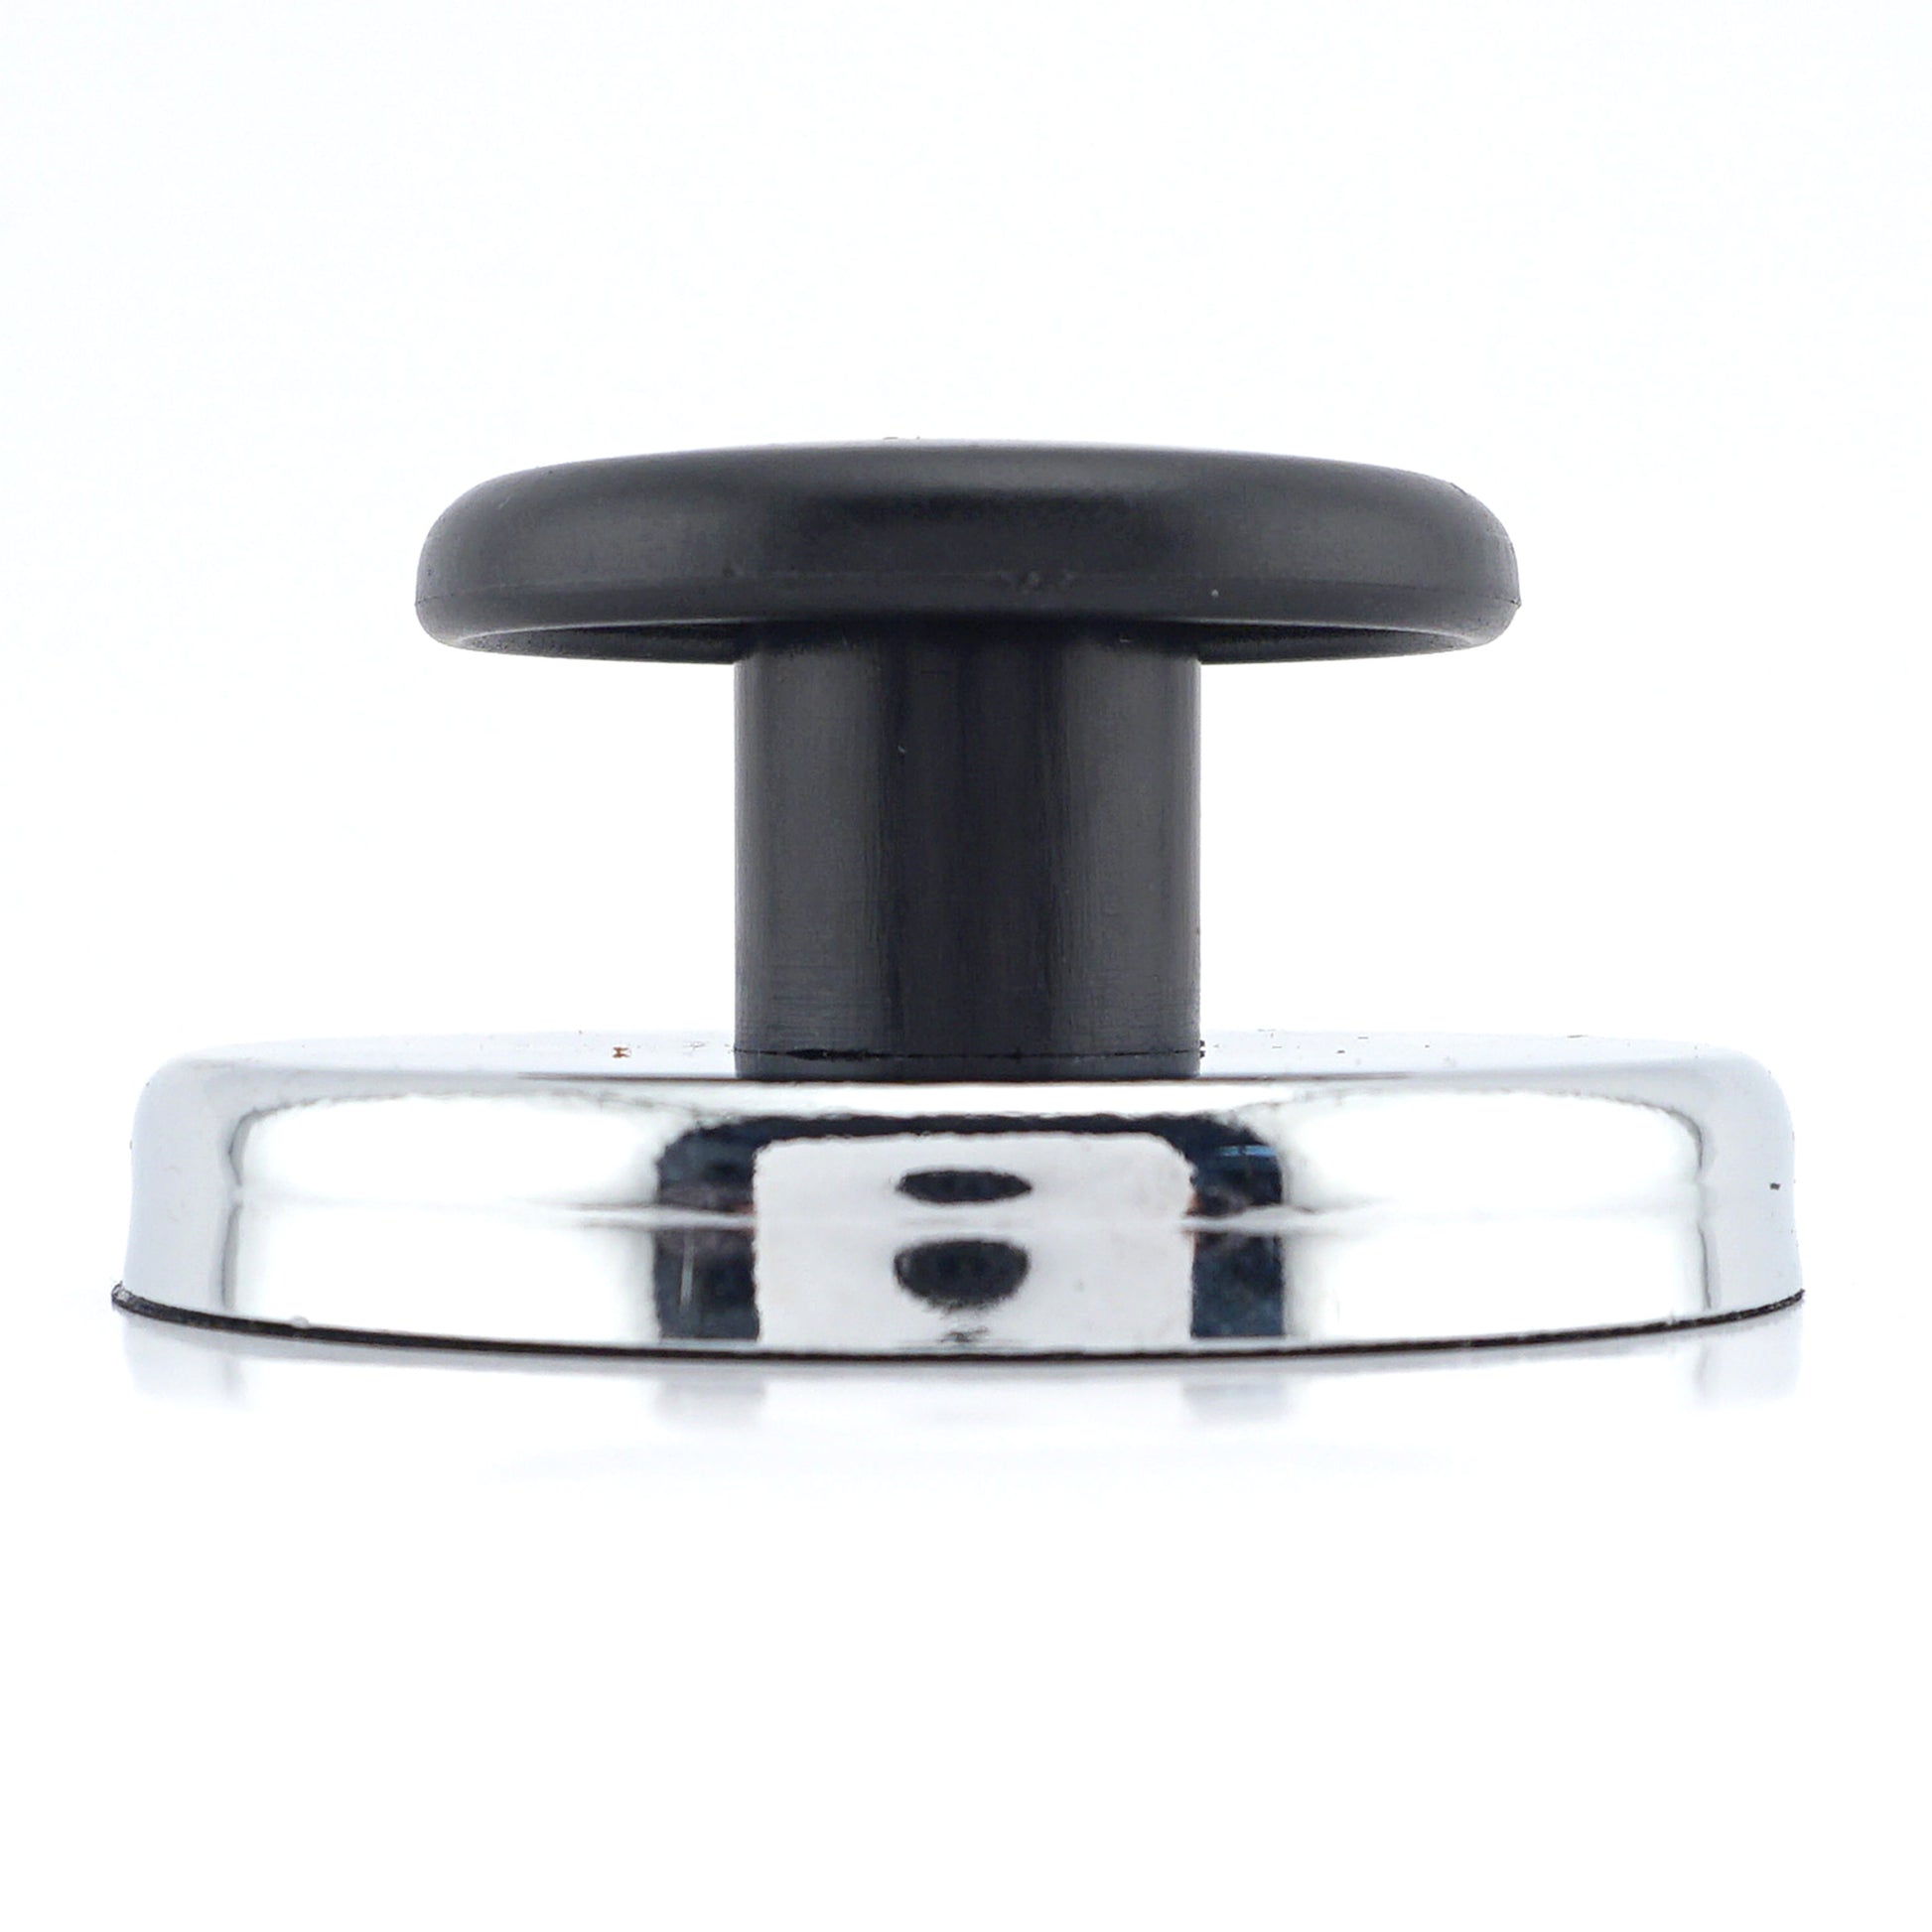 Load image into Gallery viewer, HMKR-70 Ceramic Round Base Magnet with Knob - Bottom View